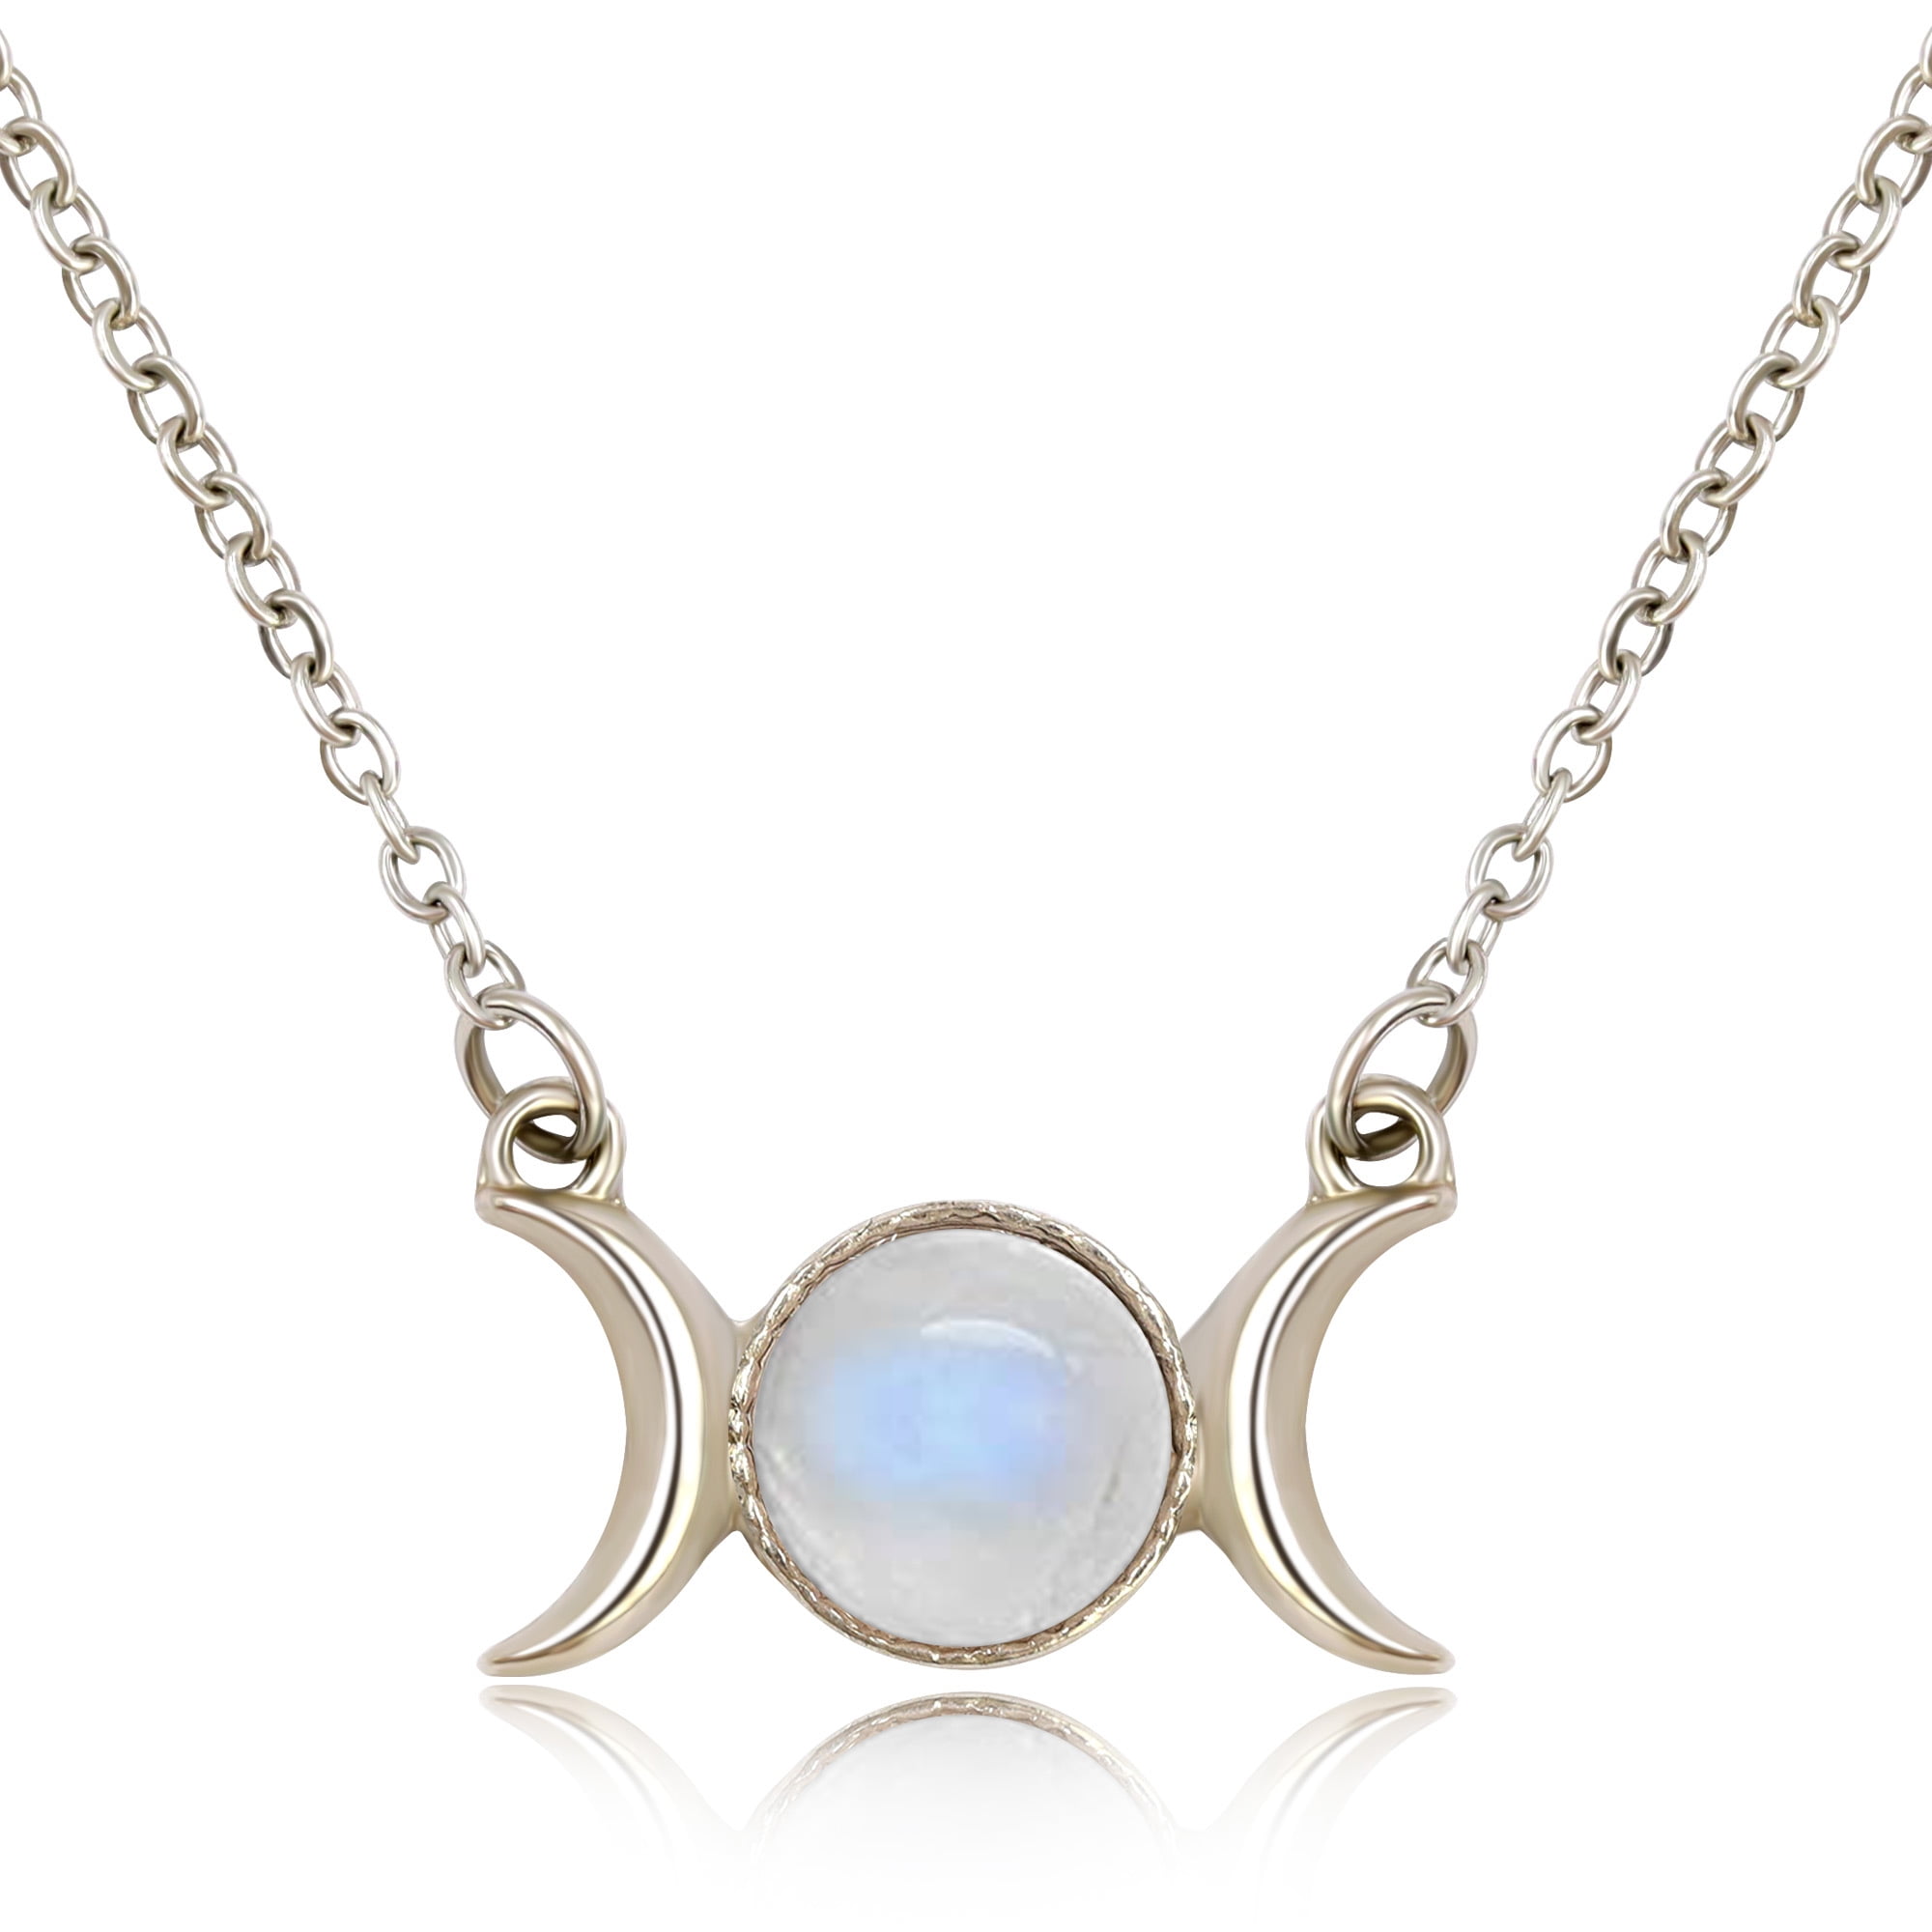 Amazon.com: Martinuzzi Accessories Opal Moon and Star Necklace Gold Plated  Sterling Silver Chain (Blue Moon White Star) : Clothing, Shoes & Jewelry